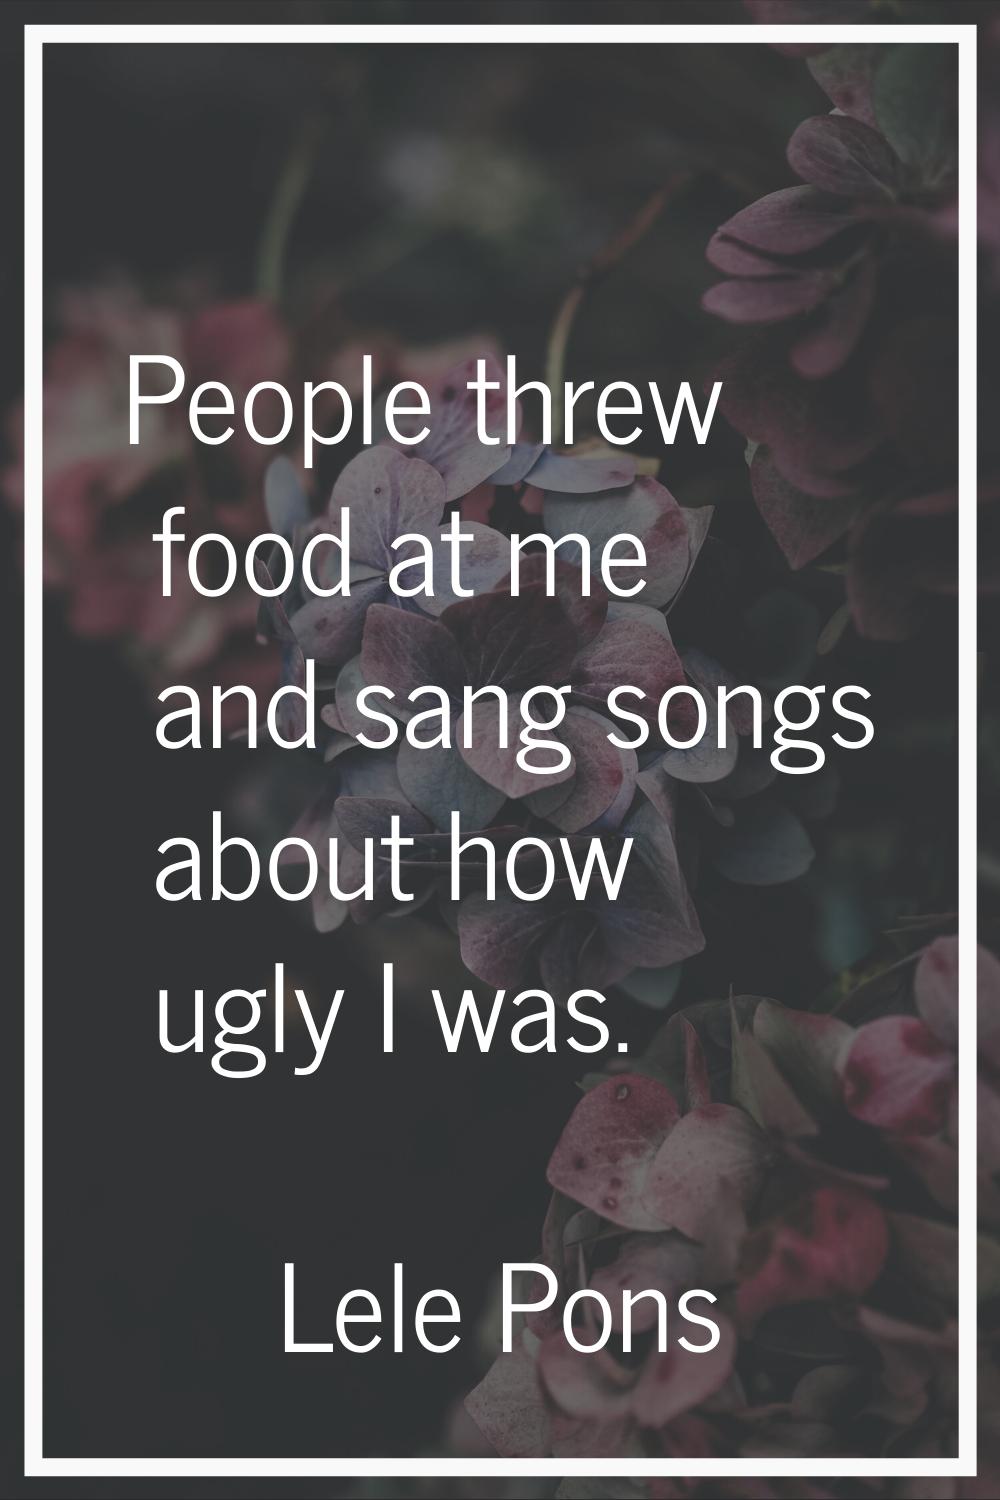 People threw food at me and sang songs about how ugly I was.